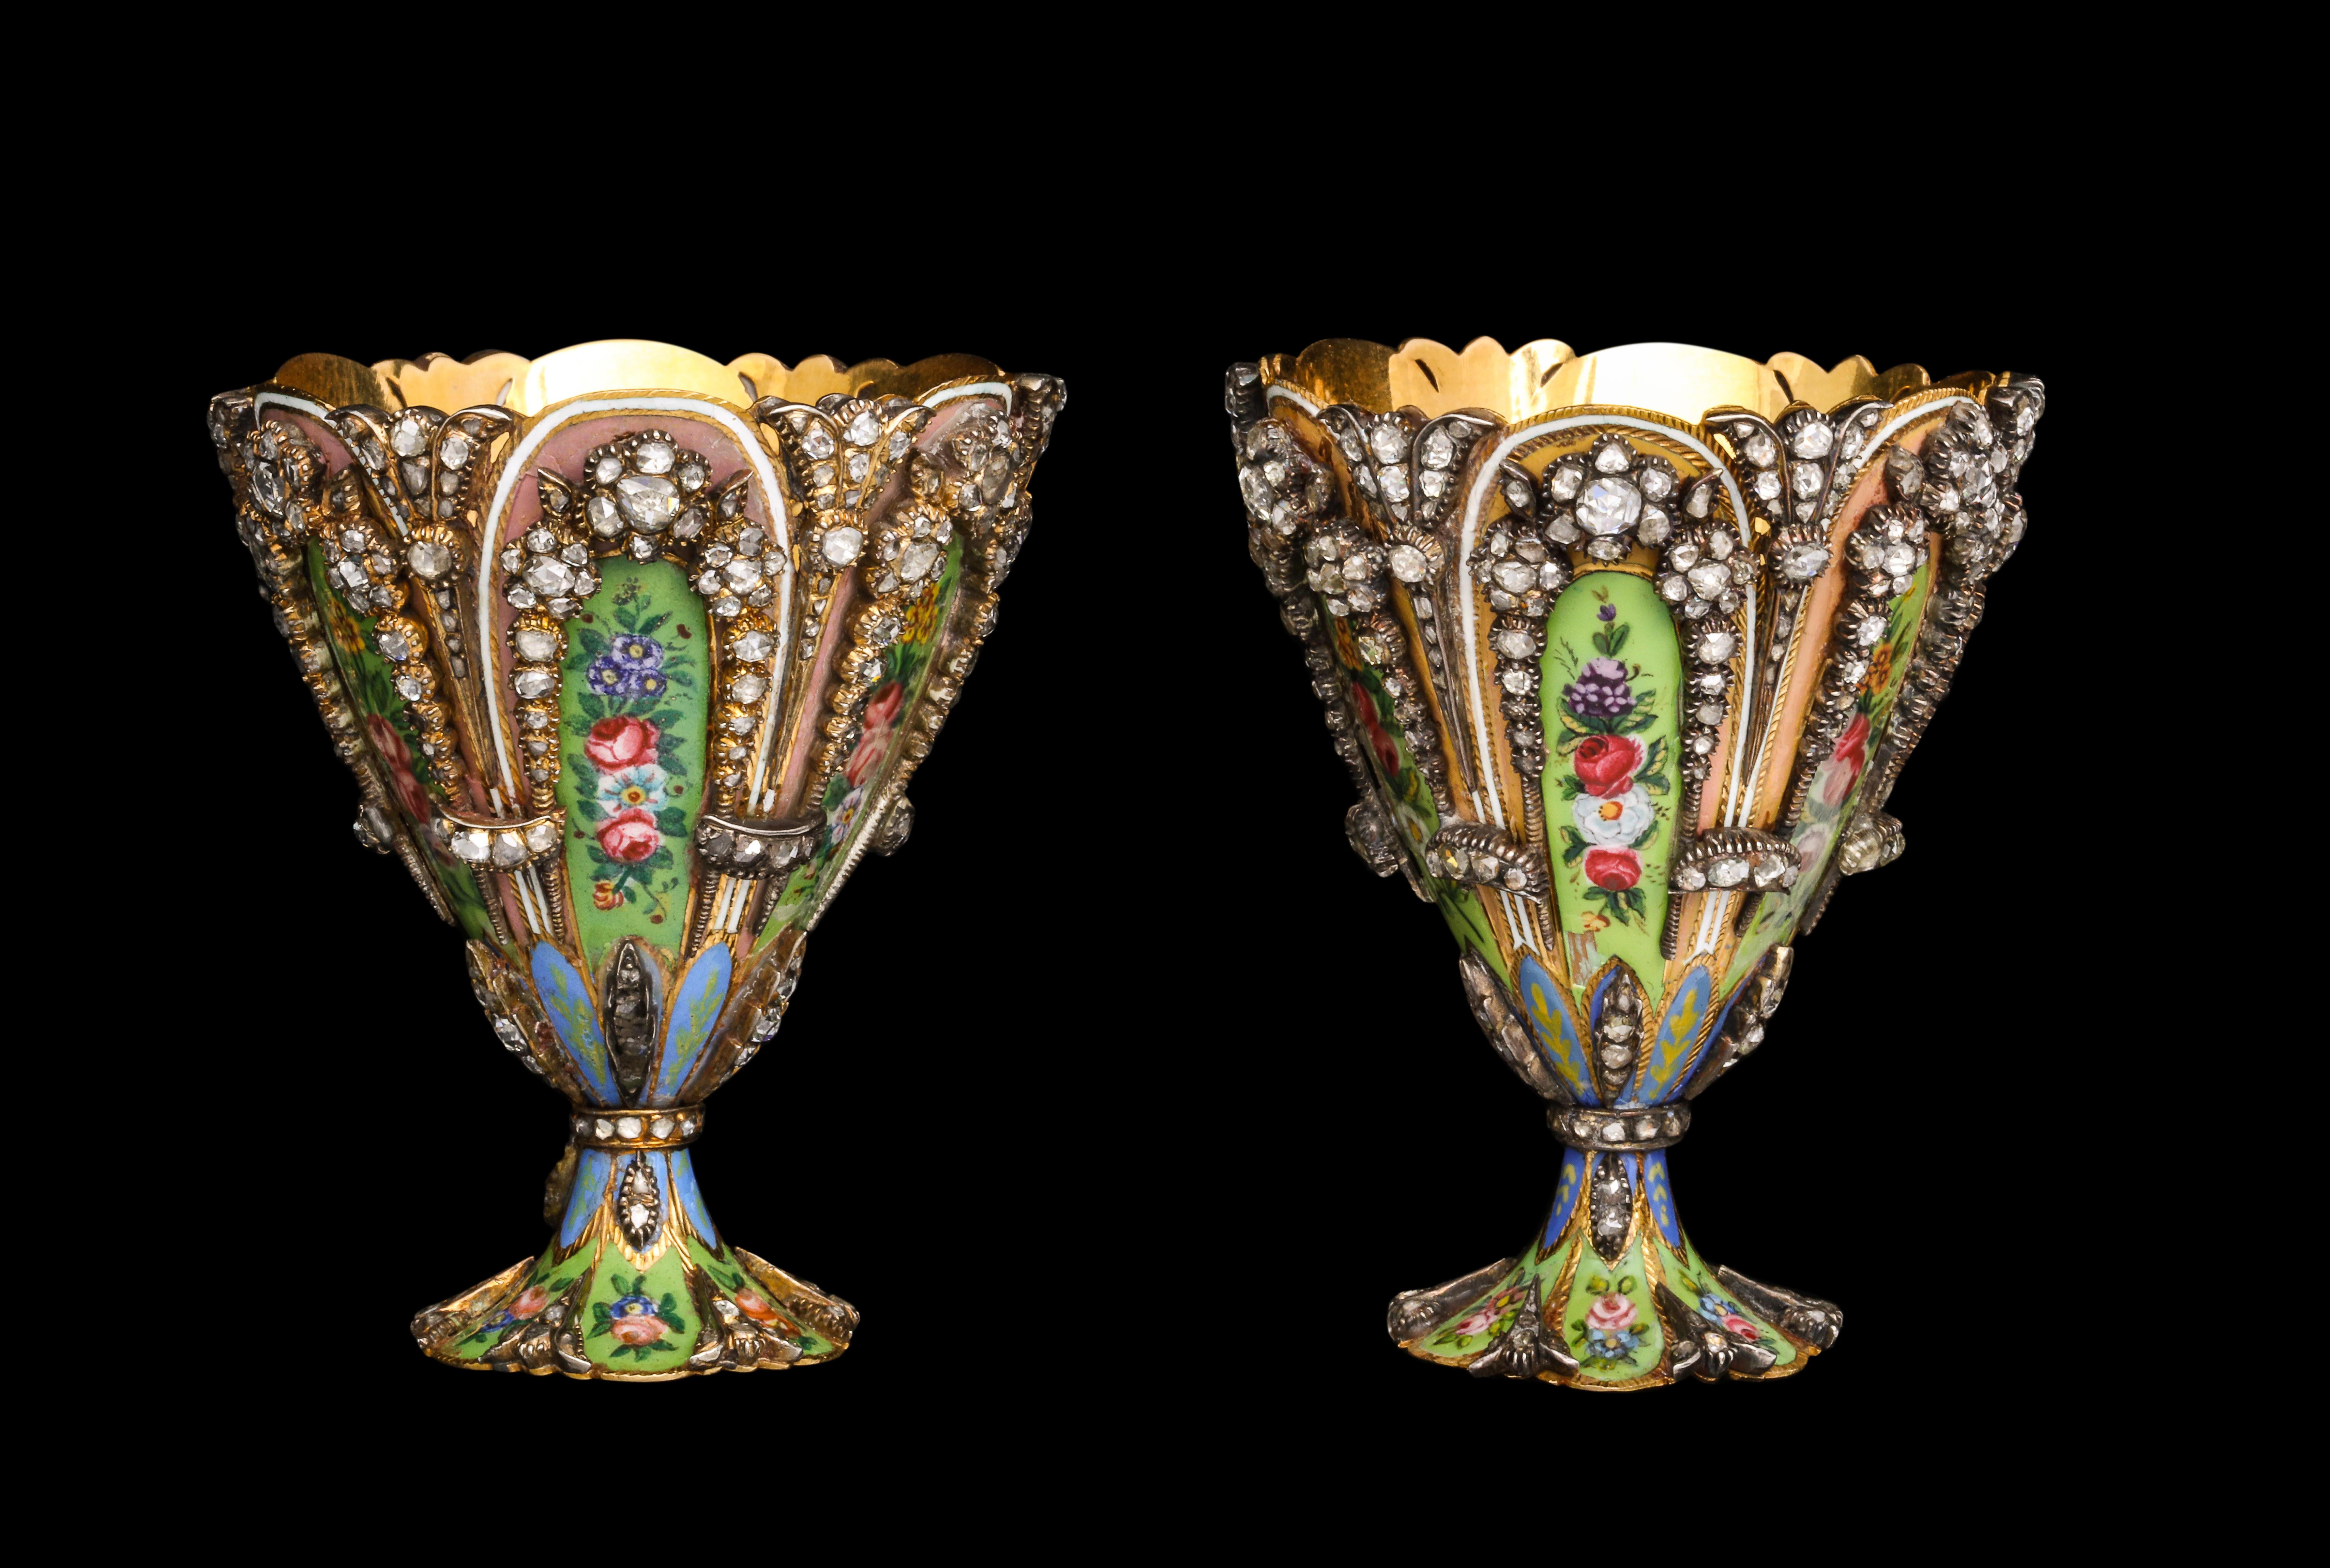 A Highly Important Museum Quality Pair of Diamond and Enamel Zarfs.

Each Zarf with  a scalloped rim and spreading foot, the sides set with colorful green and pink enamel plaques depicting flower heads and foliage. The stem and the base is a similar